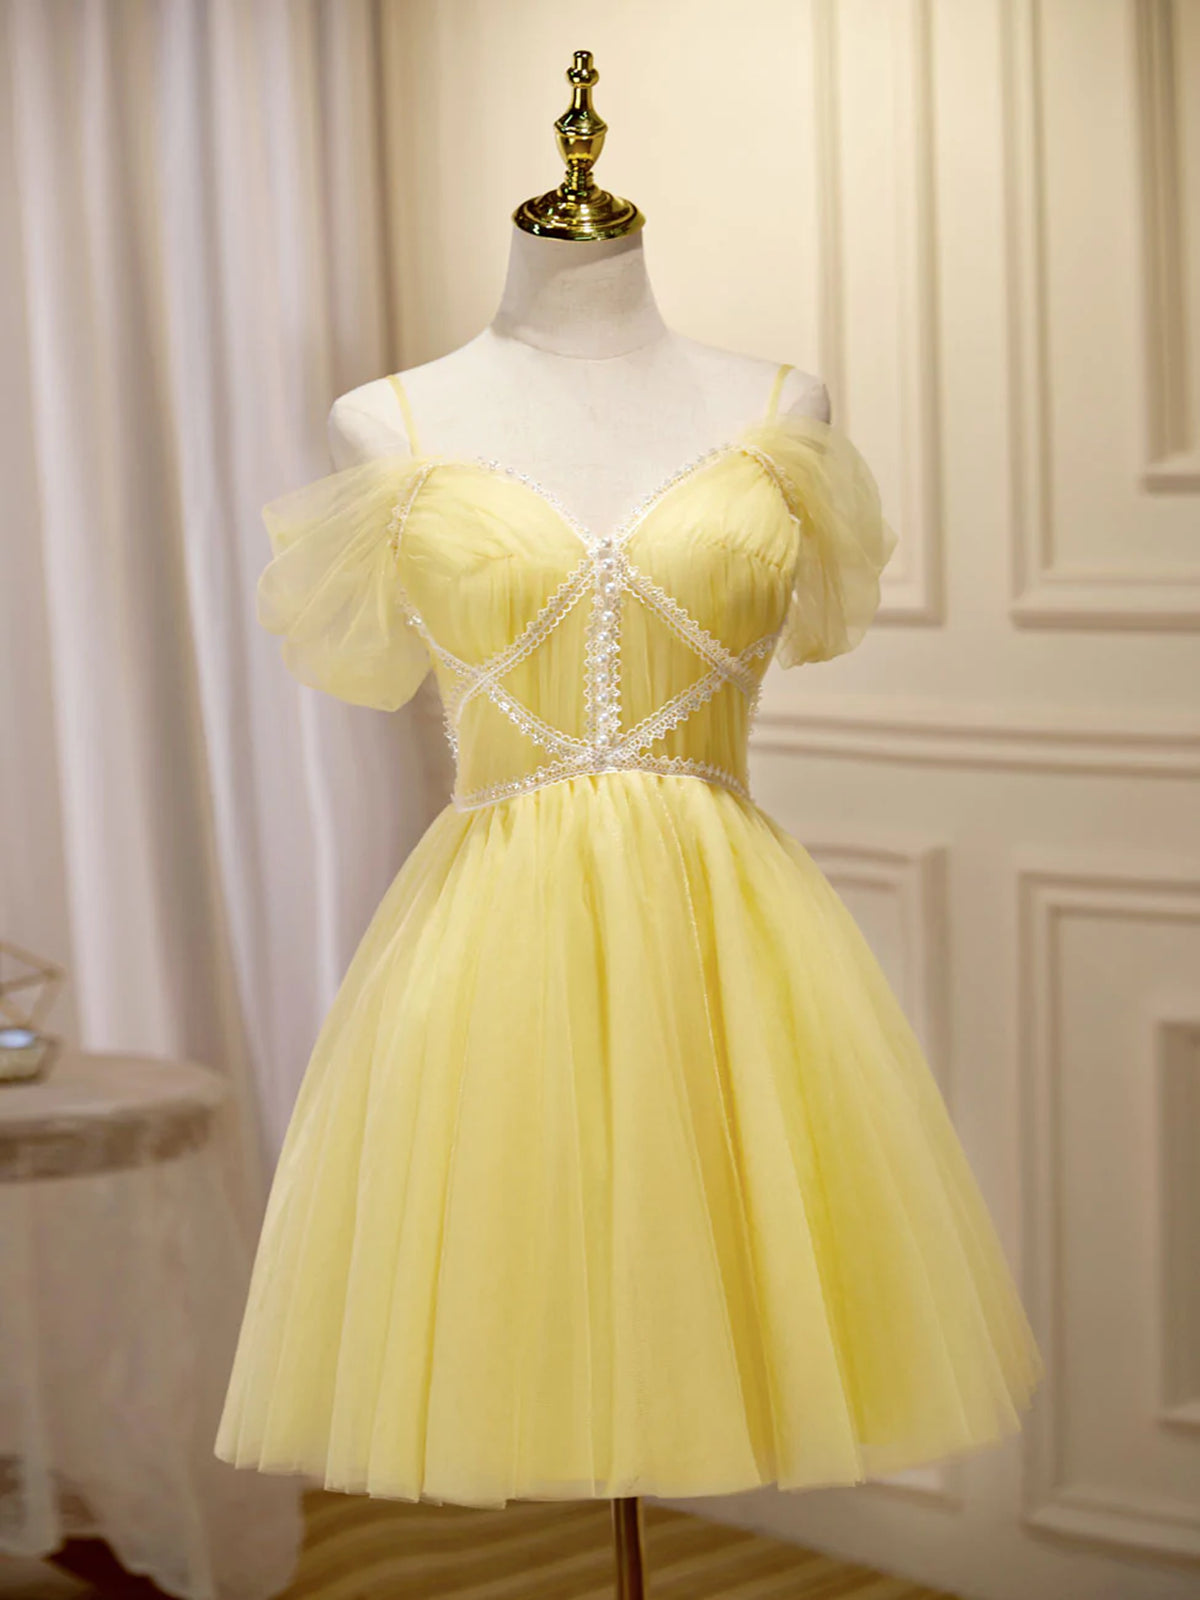 Party Dress Prom, Off the Shoulder Short Yellow Prom Dresses, Off Shoulder Short Yellow Formal Graduation Dresses